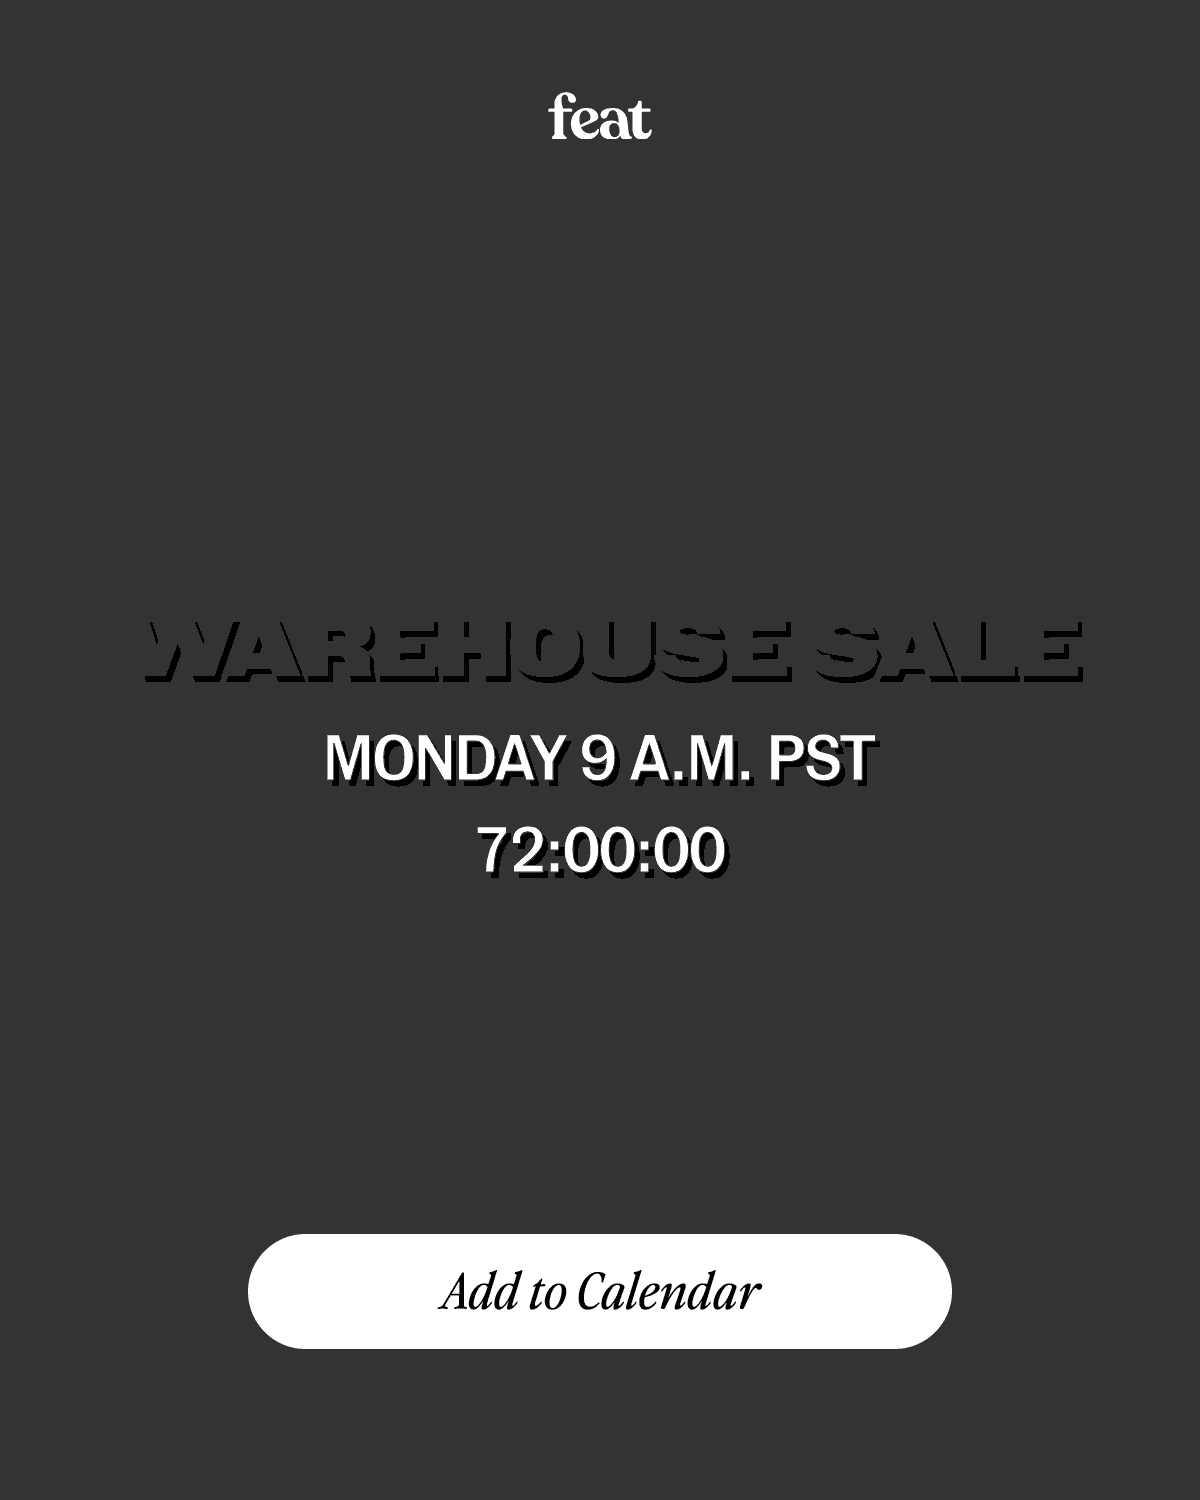 Feat Warehouse Sale – Monday, October 3, 2022 at 9 am PST